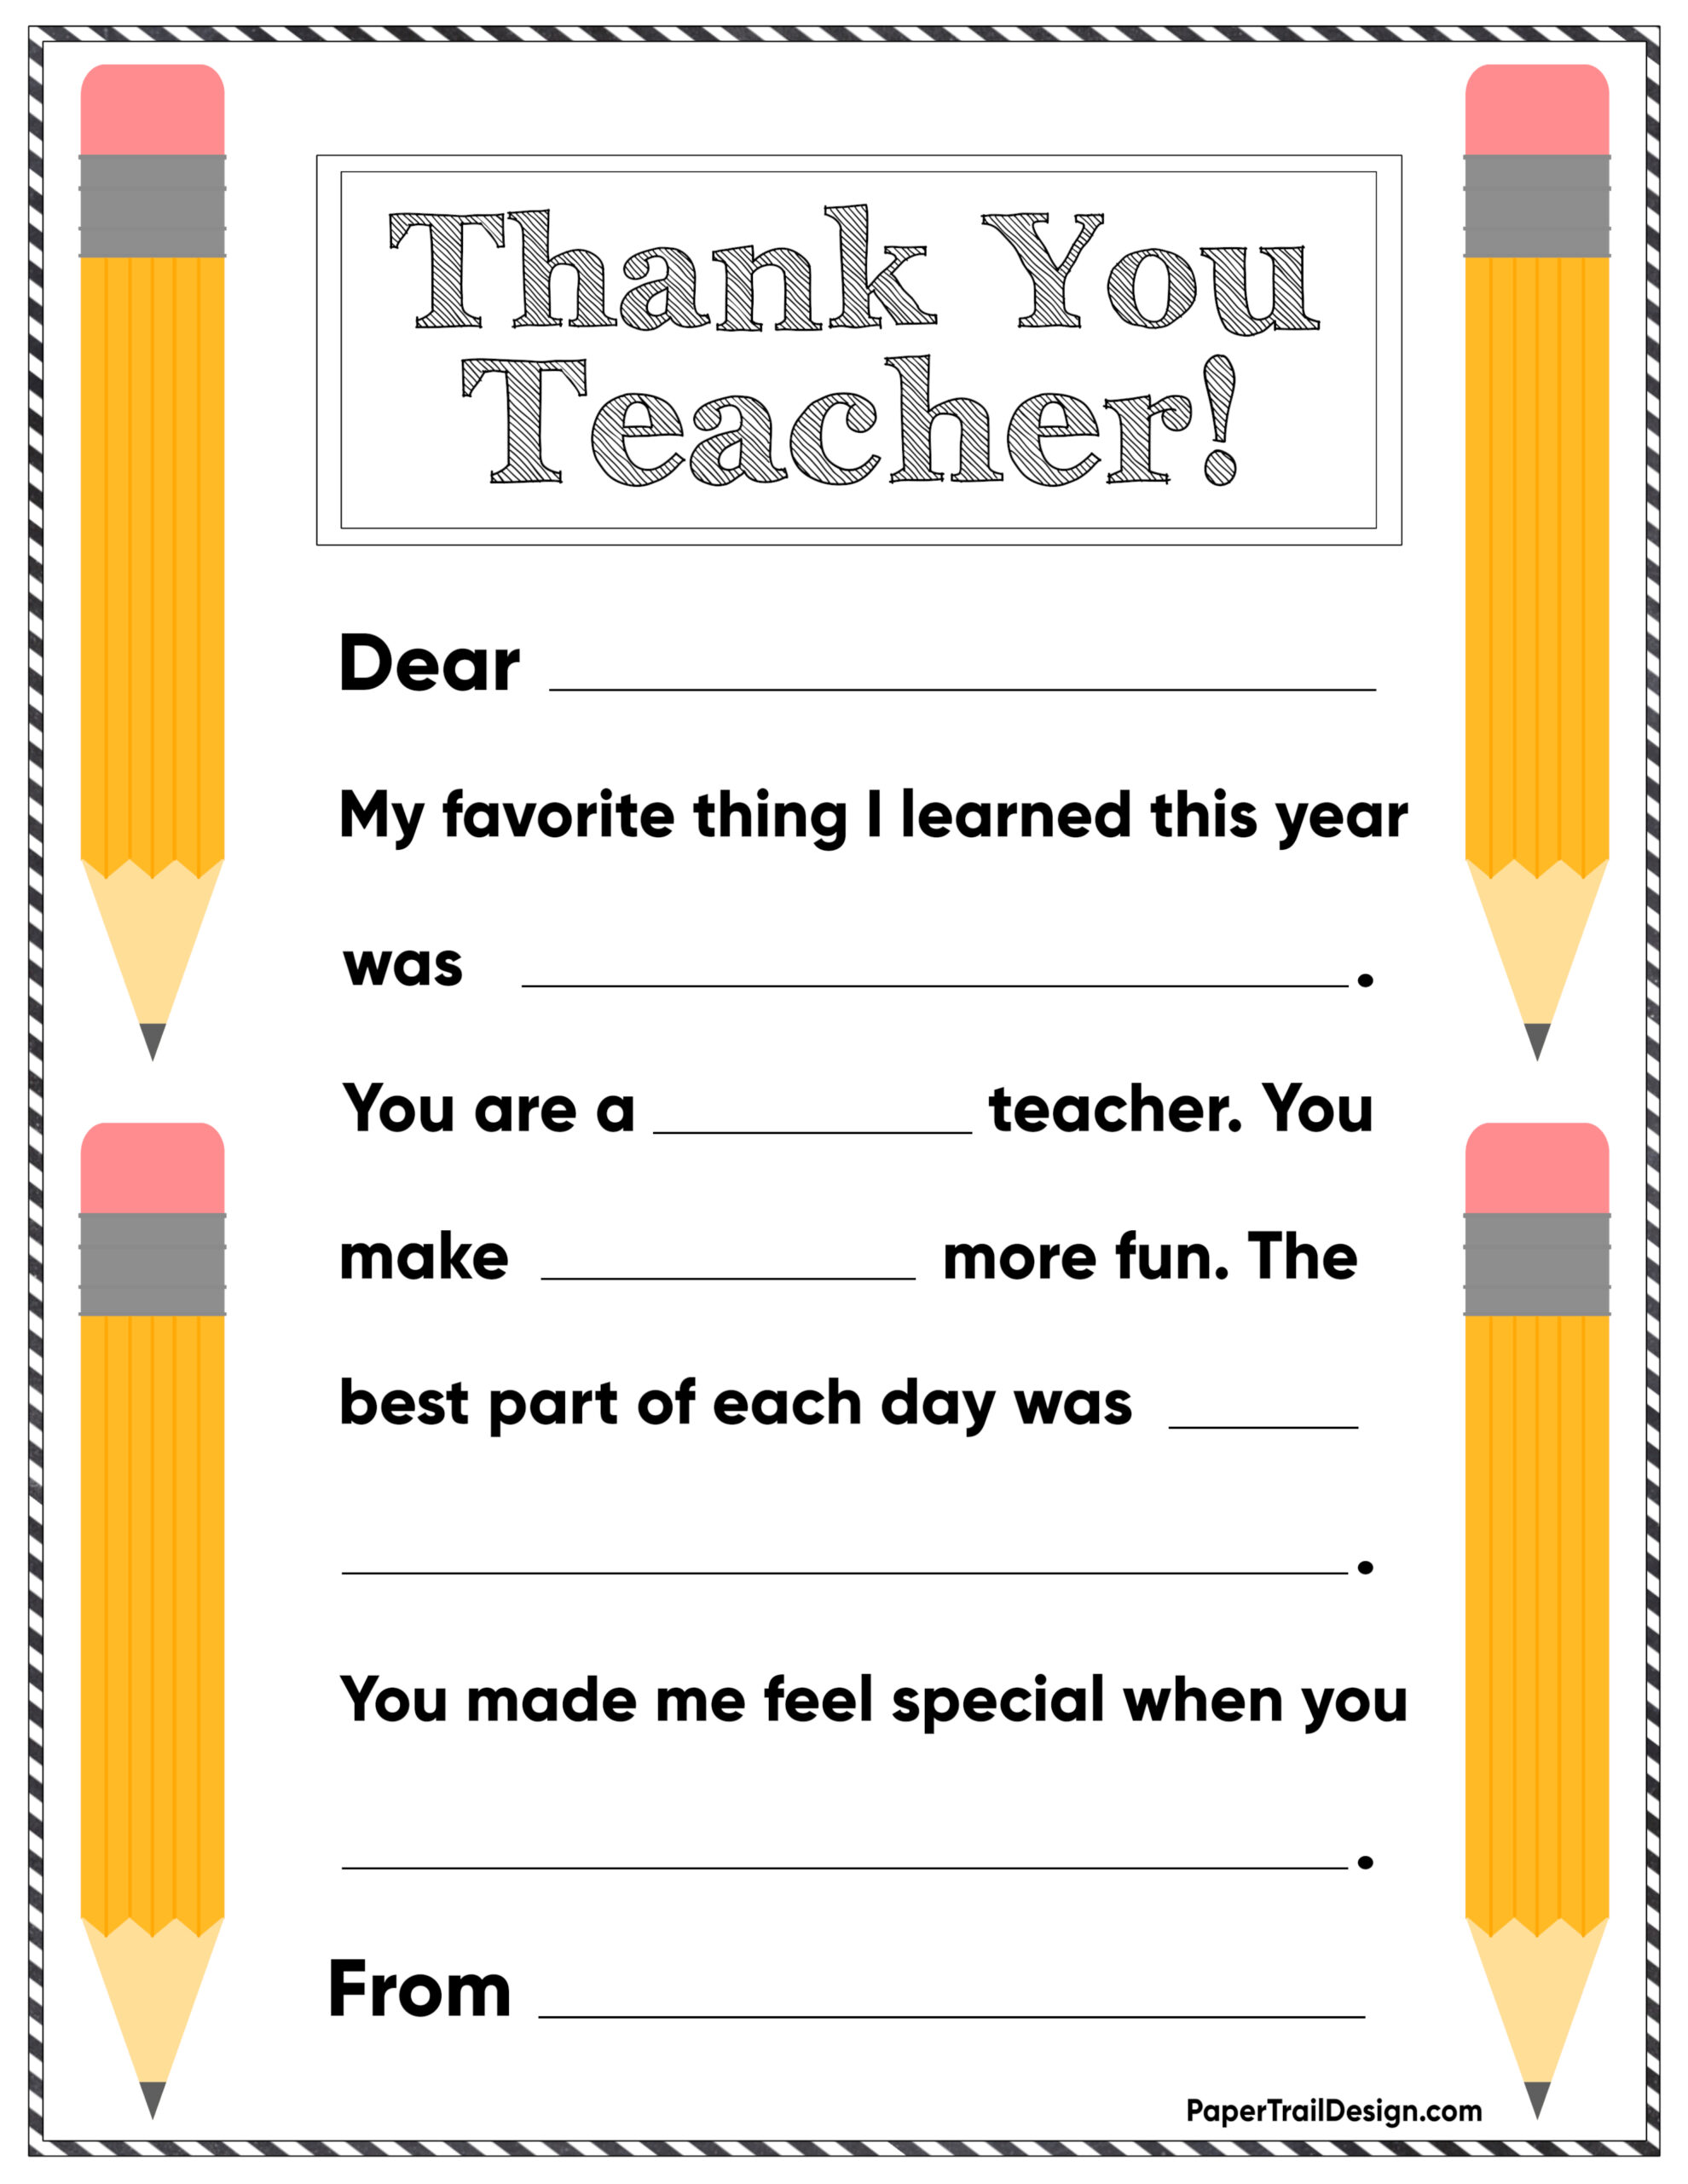 template-free-printable-thank-you-cards-for-teachers-printable-templates